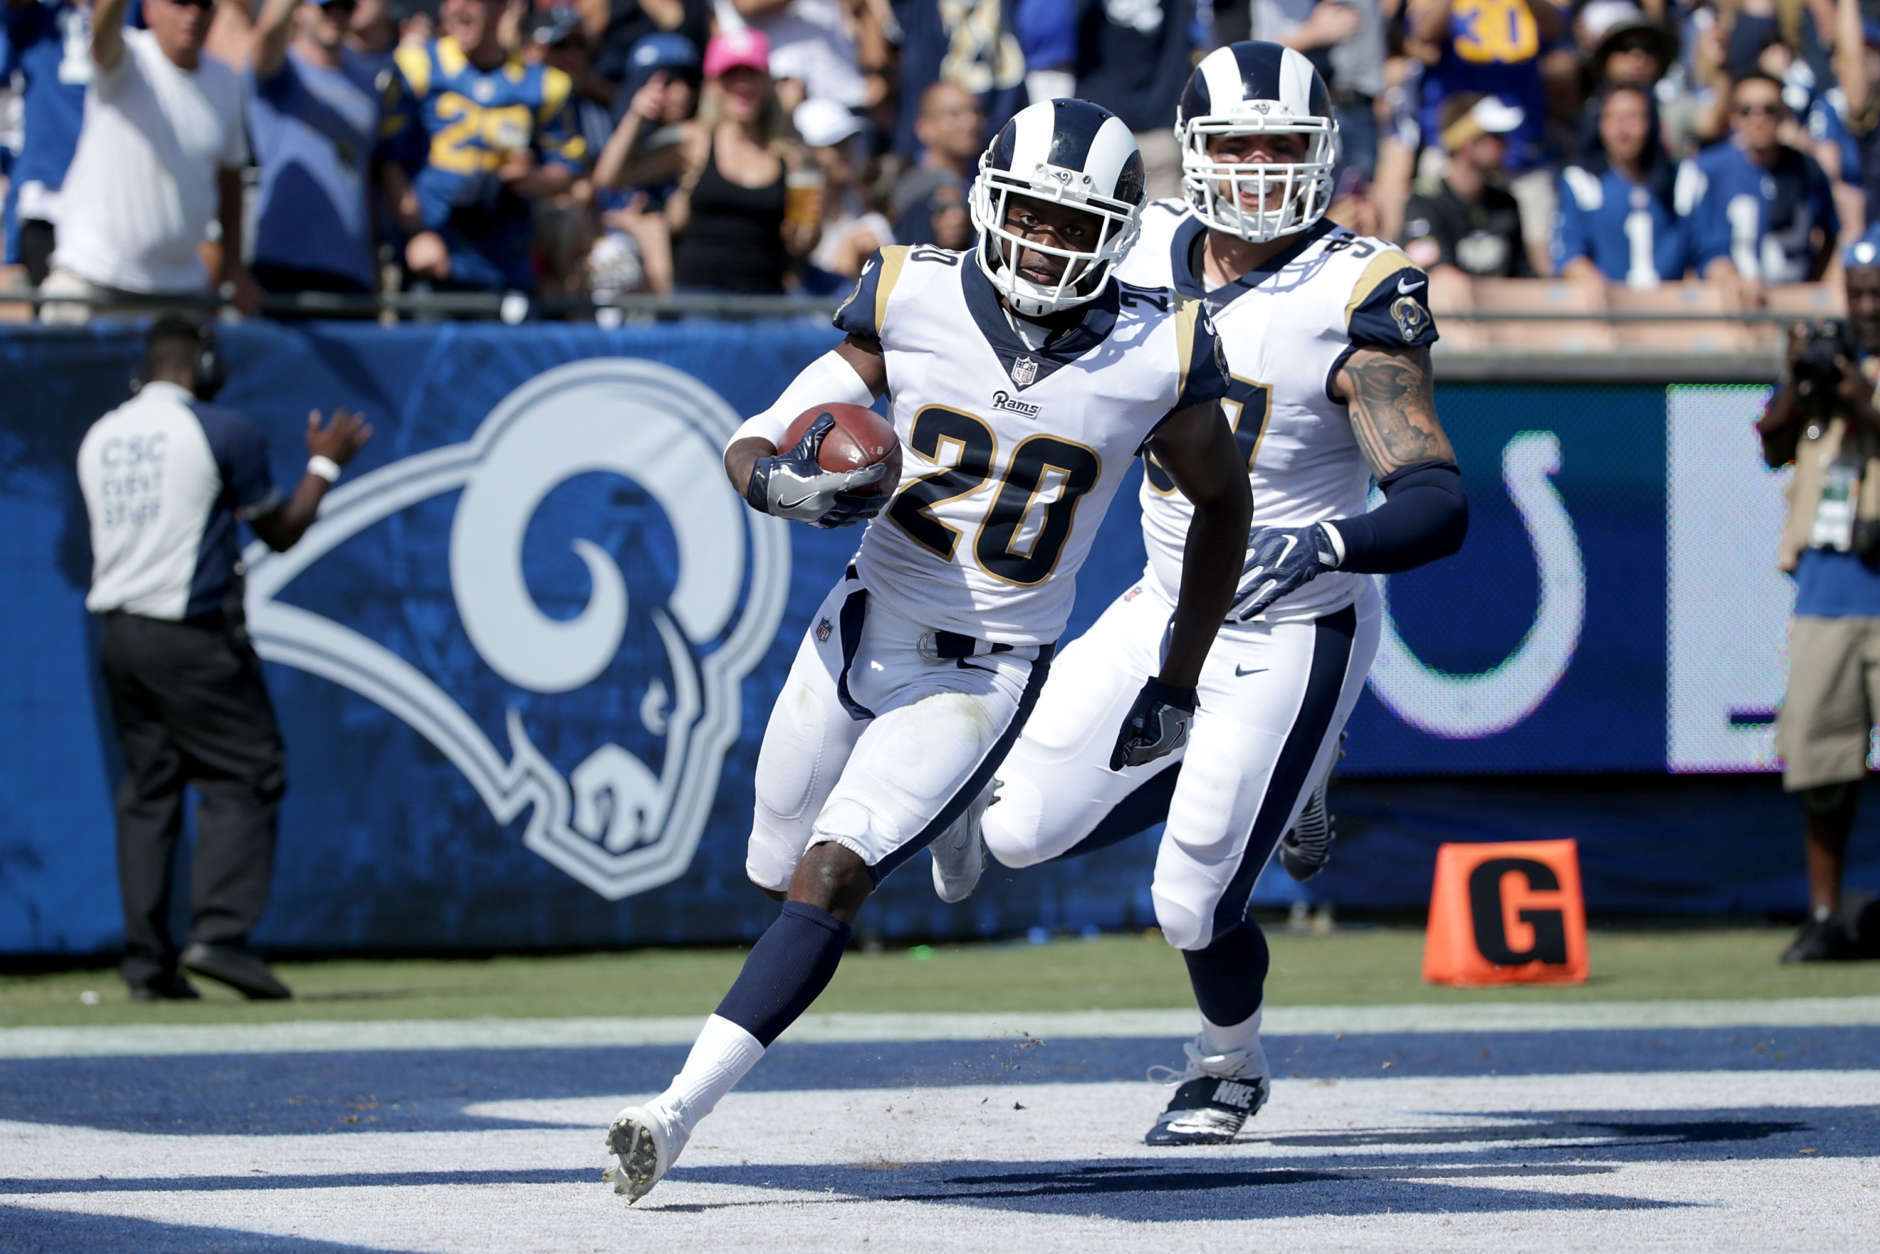 LOS ANGELES, CA - SEPTEMBER 10:  Lamarcus Joyner #20 of the Los Angeles Rams returns an interception during the third quarter in the game against the Indianapolis Colts at the Los Angeles Memorial Coliseum on September 10, 2017 in Los Angeles, California.  (Photo by Jeff Gross/Getty Images)